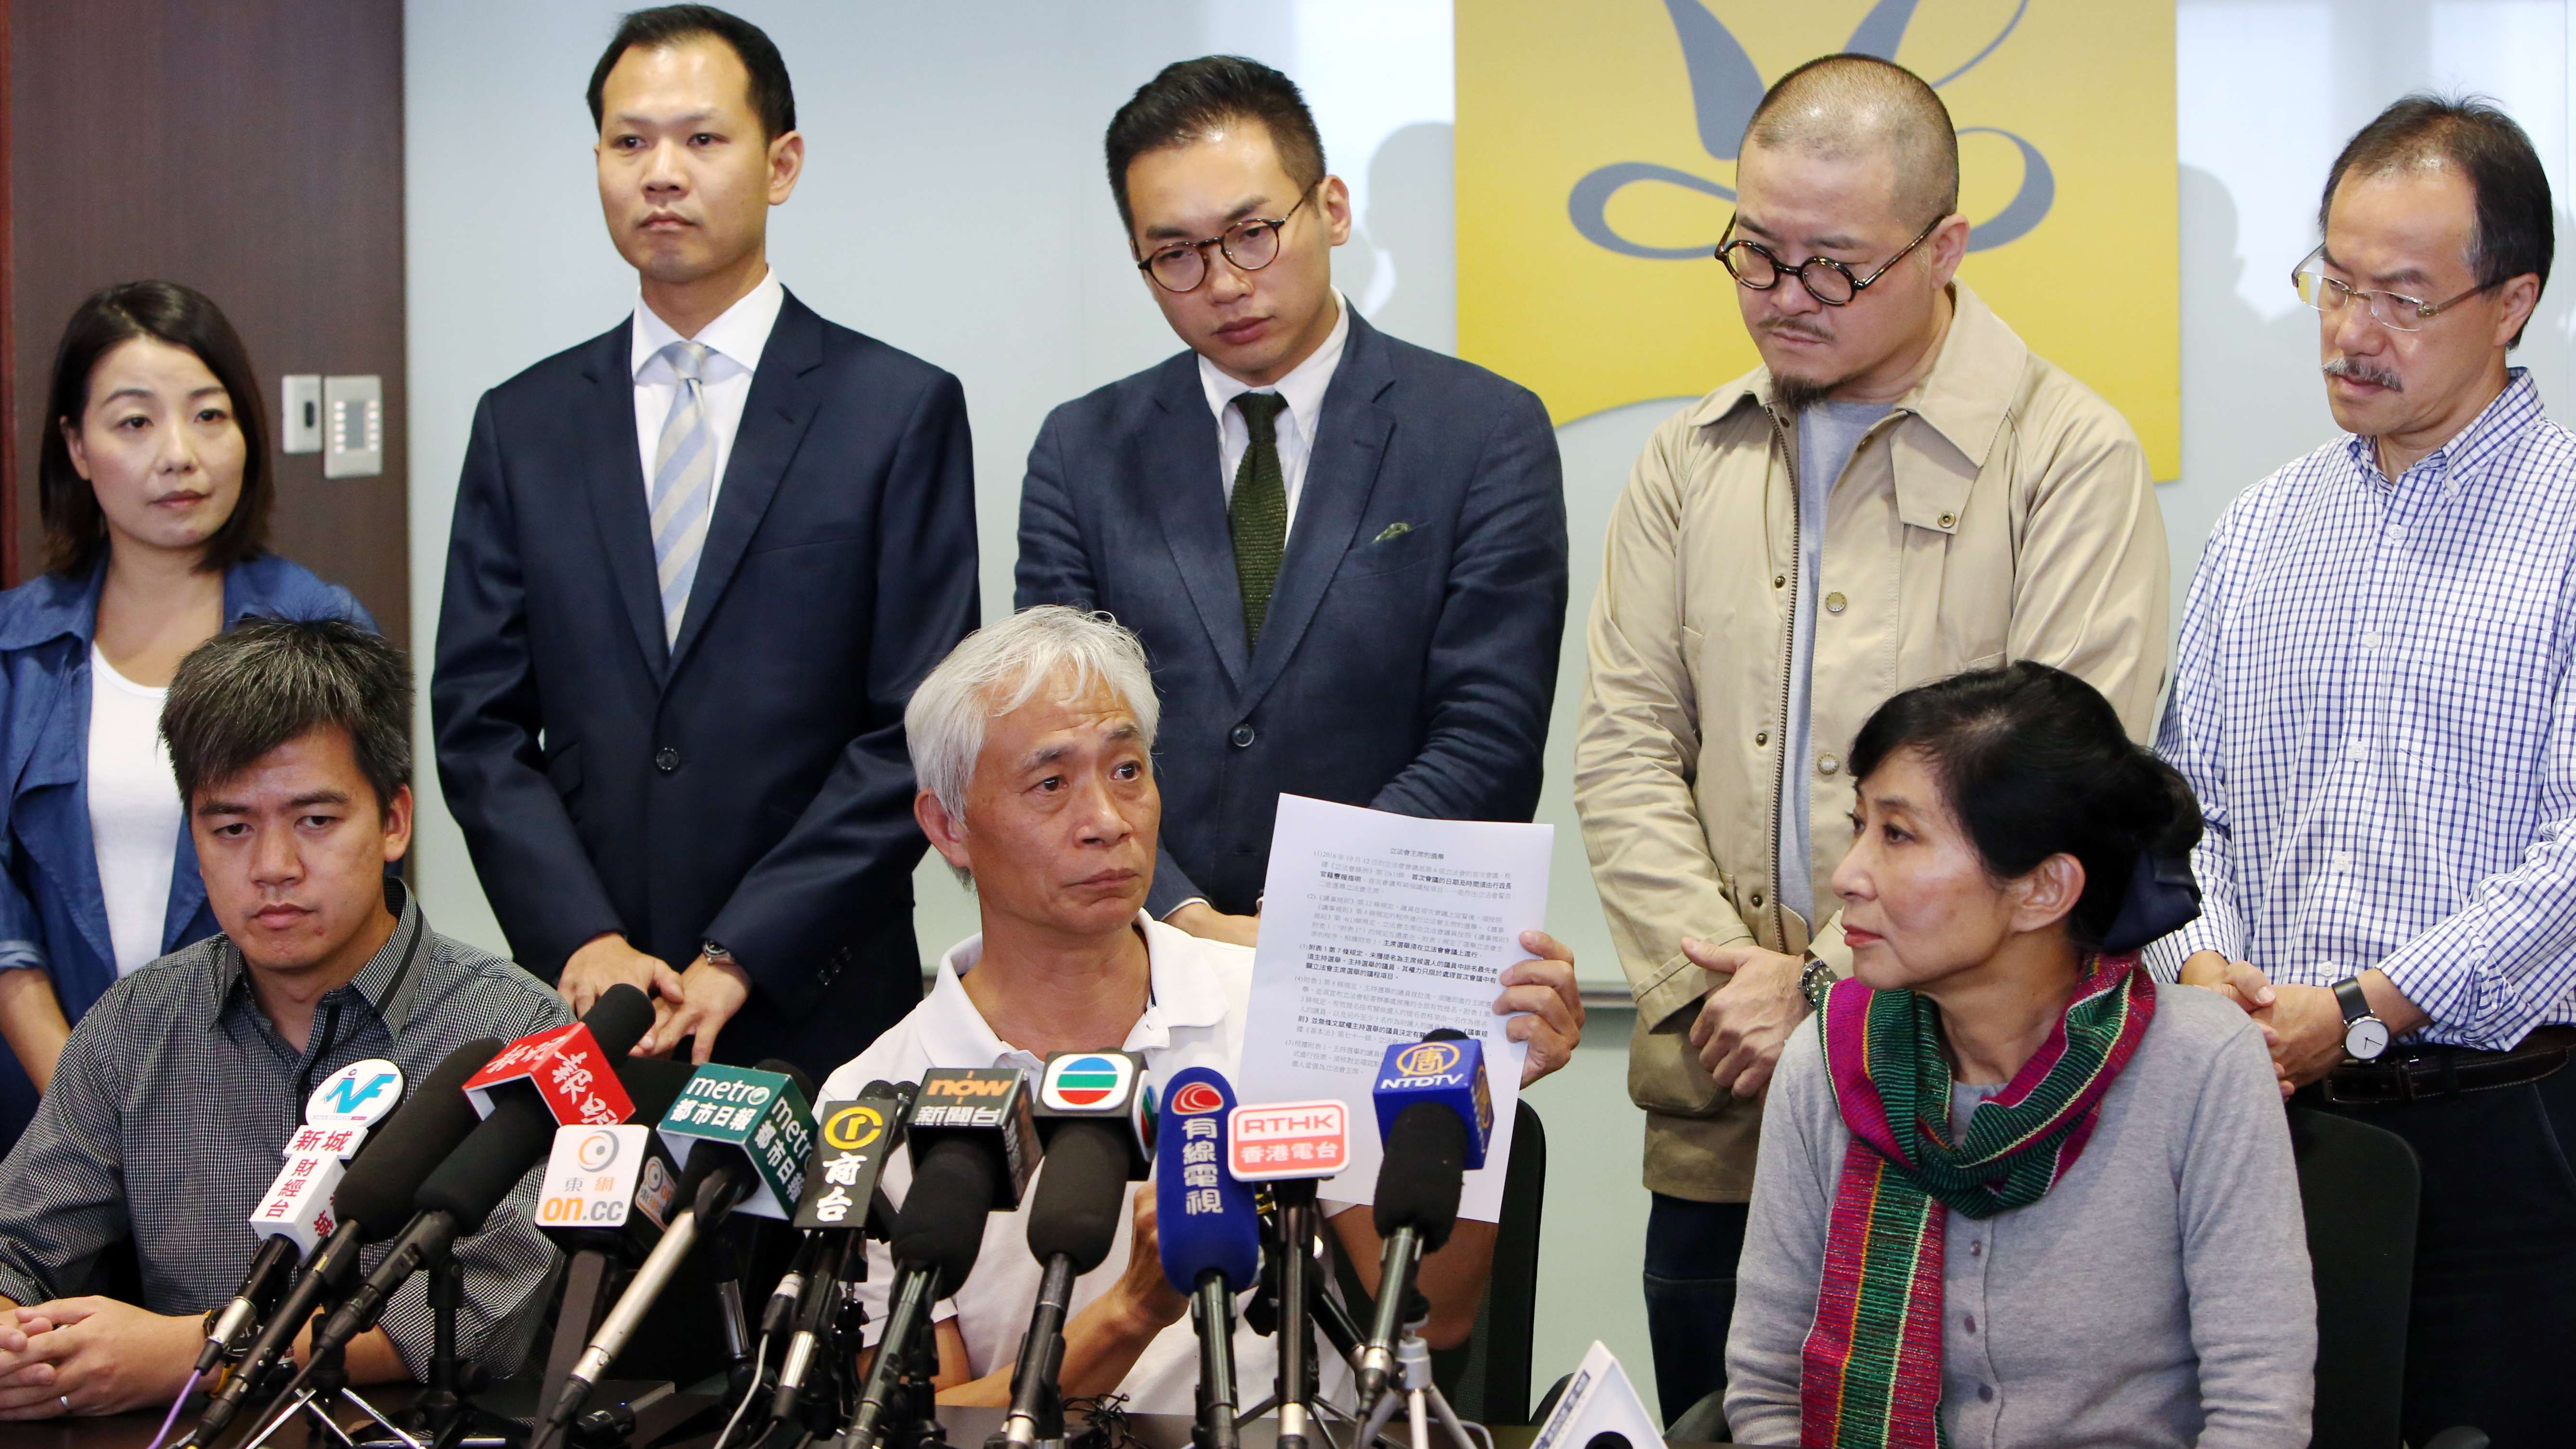 Pan-democratic veteran Leung Yiu-chung (centre) explains why he refused to chair the election proceedings. Photo: Edmond So